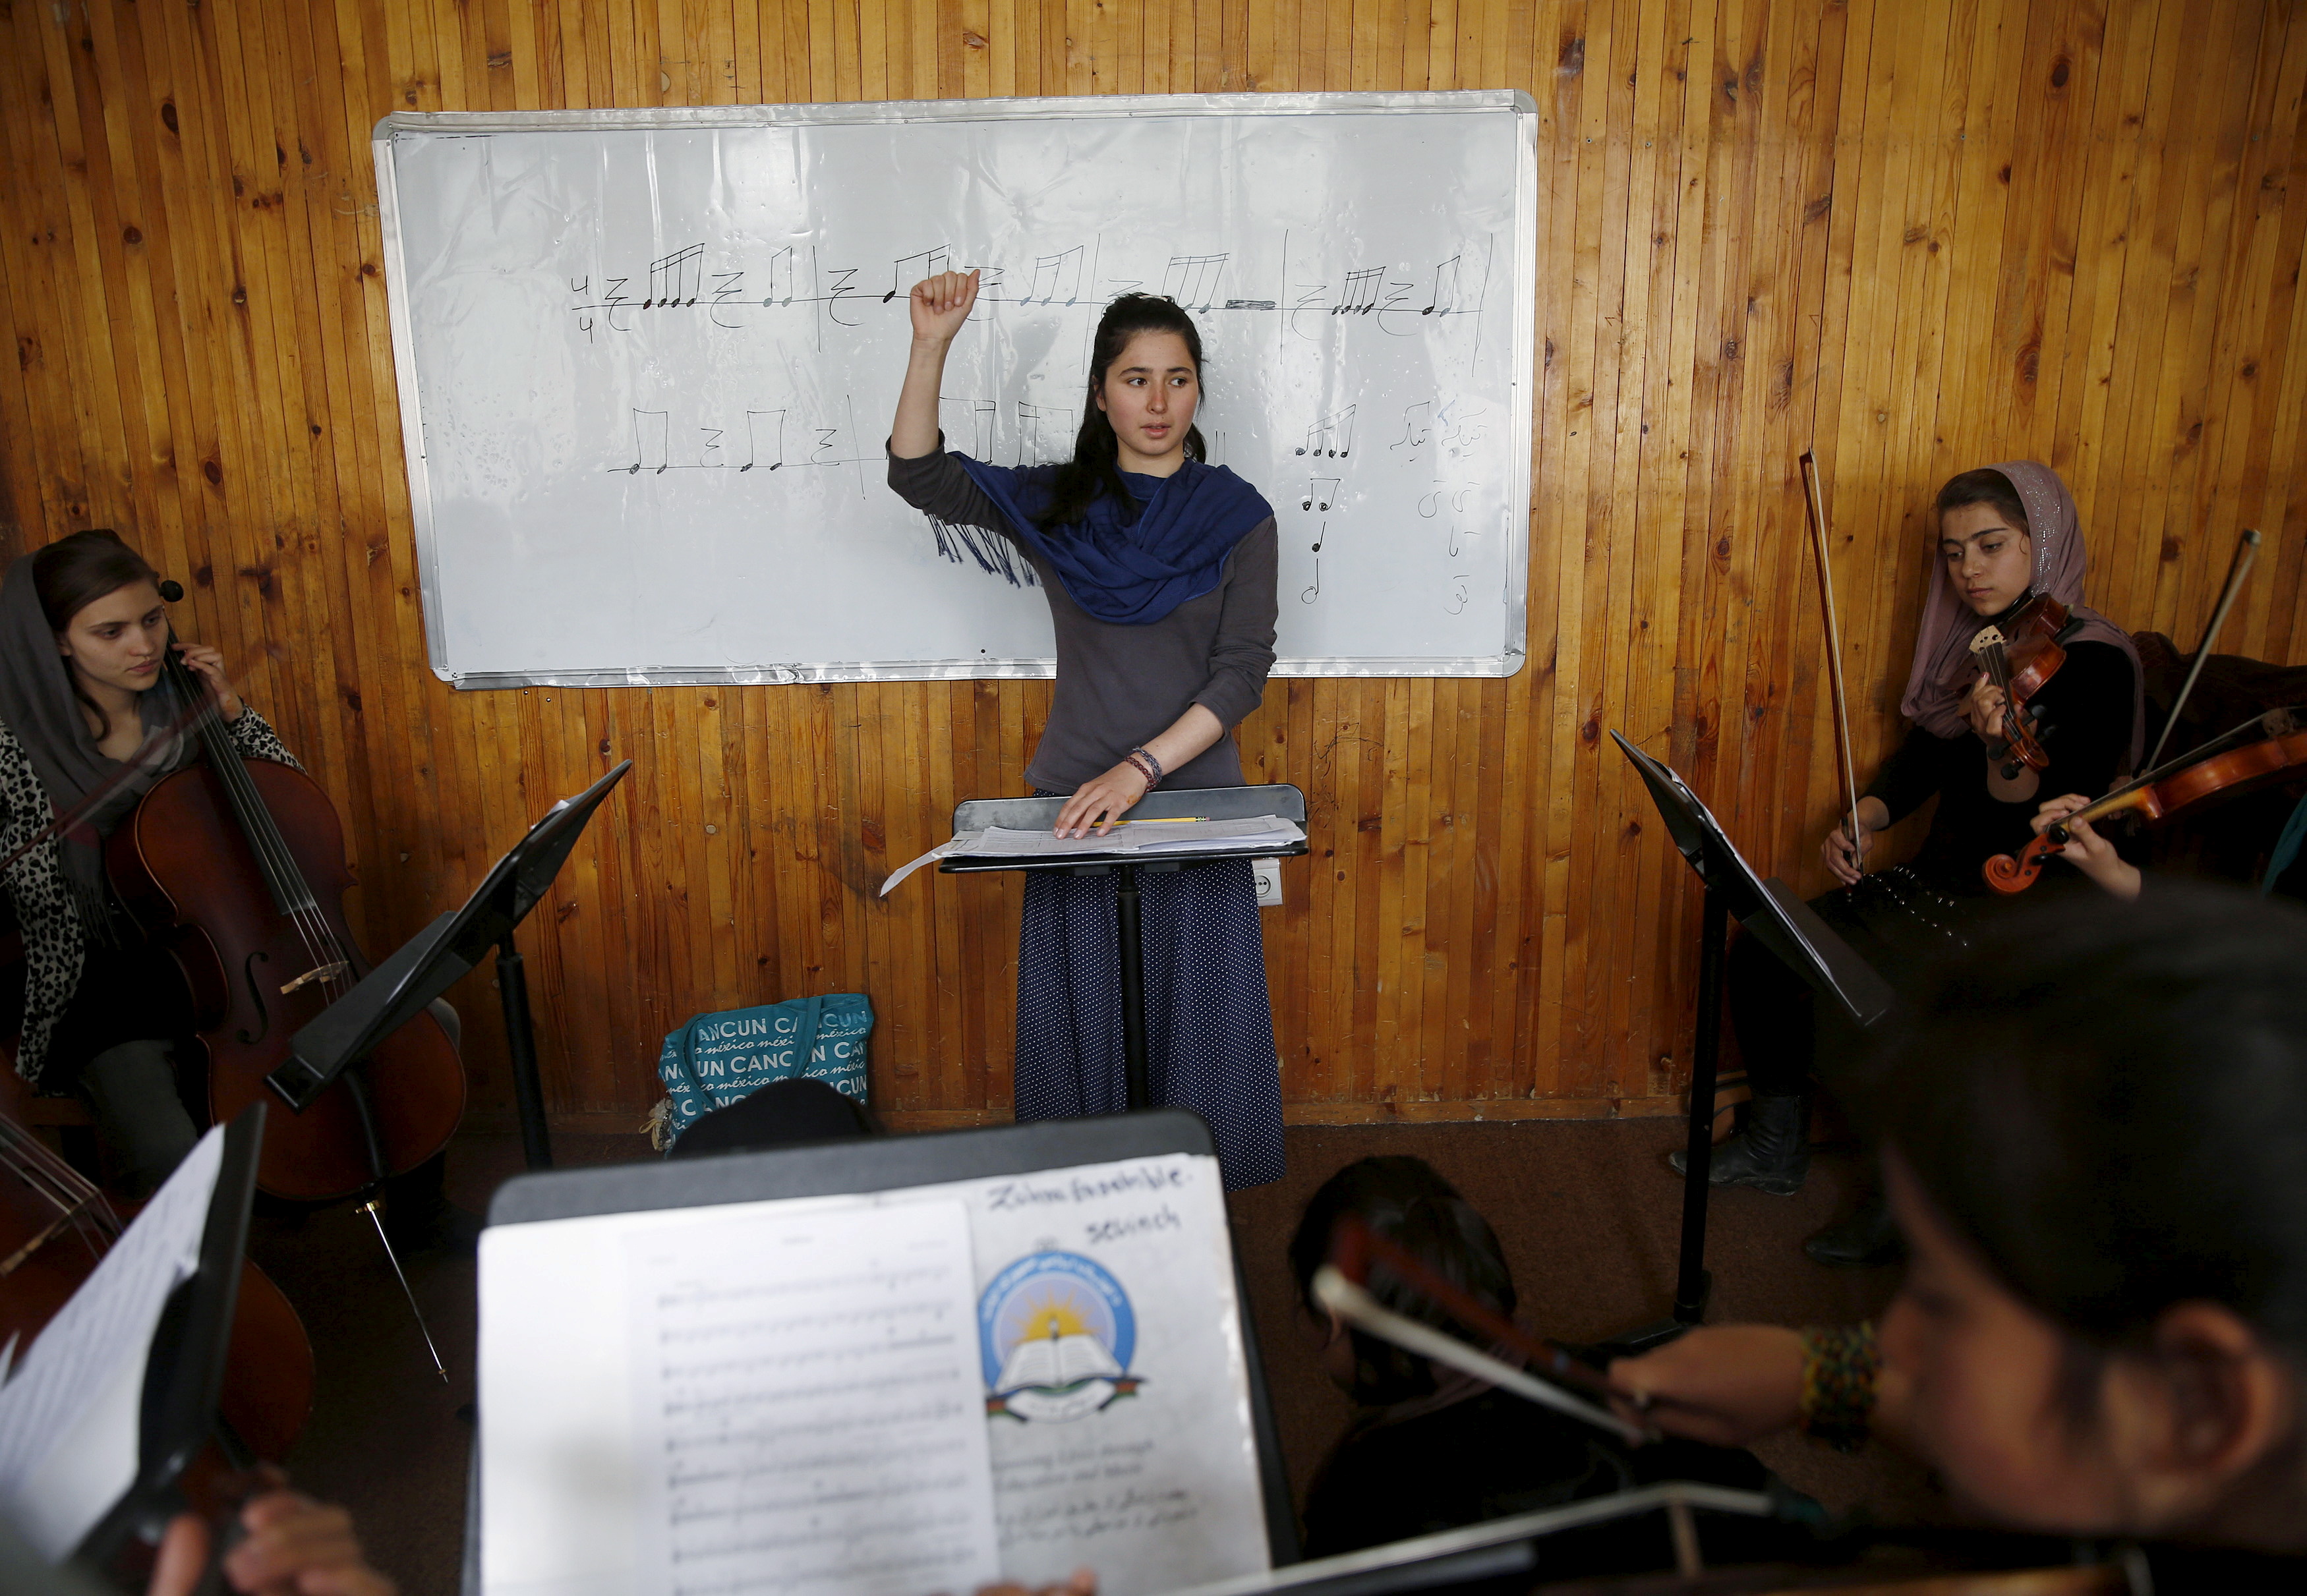 Members of the Zohra orchestra, an ensemble of 35 women, practises during a session, at Afghanistan's National Institute of Music, in Kabul